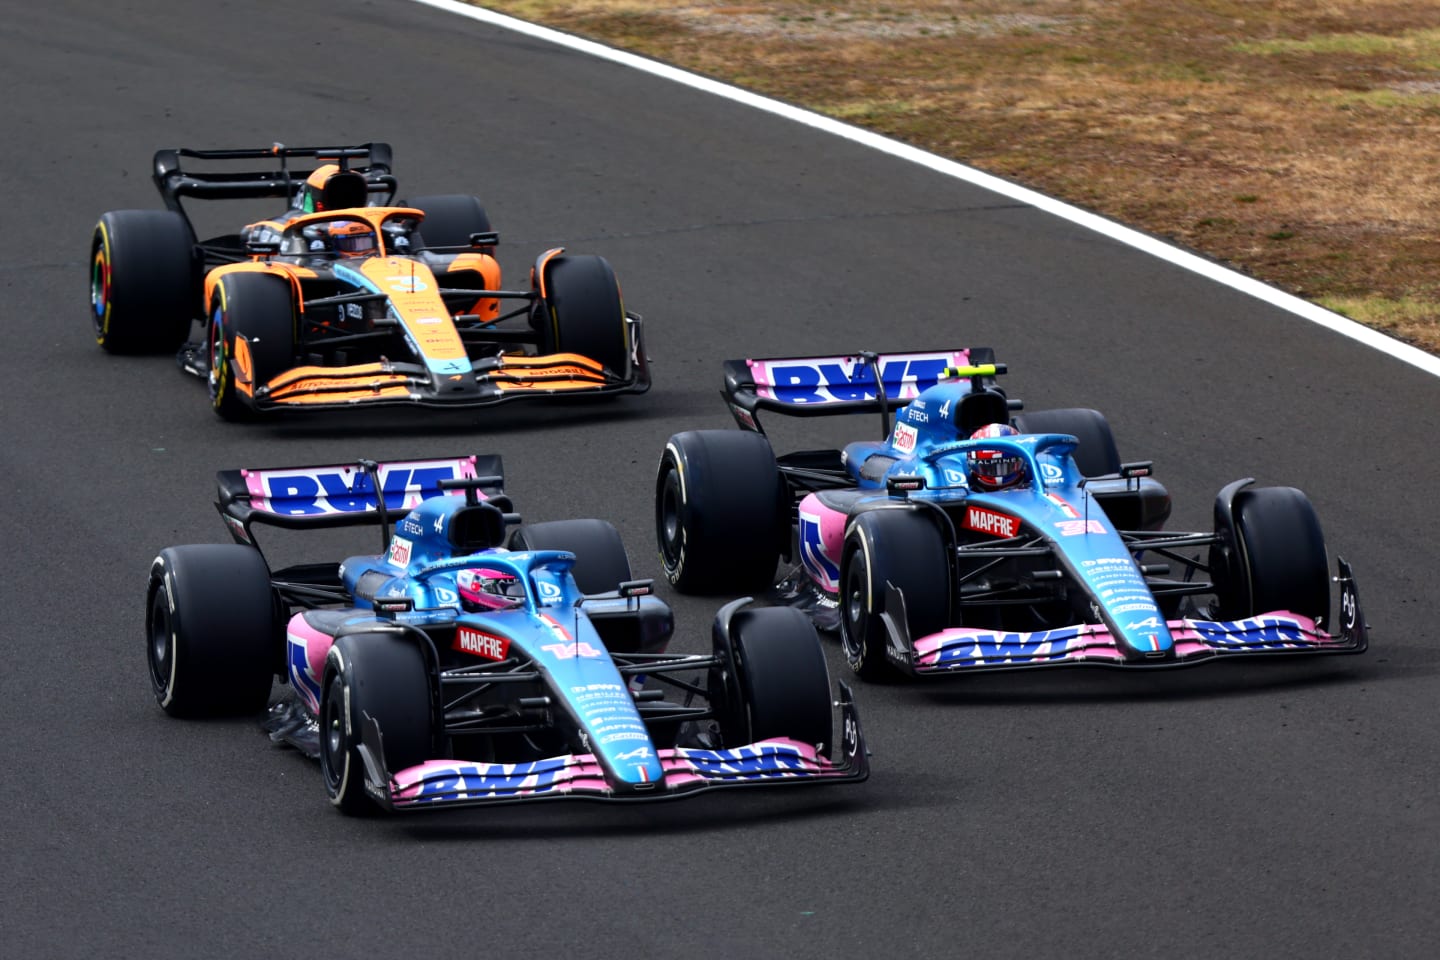 BUDAPEST, HUNGARY - JULY 31: Fernando Alonso of Spain driving the (14) Alpine F1 A522 Renault, Esteban Ocon of France driving the (31) Alpine F1 A522 Renault and Daniel Ricciardo of Australia driving the (3) McLaren MCL36 Mercedes battle for track position during the F1 Grand Prix of Hungary at Hungaroring on July 31, 2022 in Budapest, Hungary. (Photo by Dan Istitene - Formula 1/Formula 1 via Getty Images)